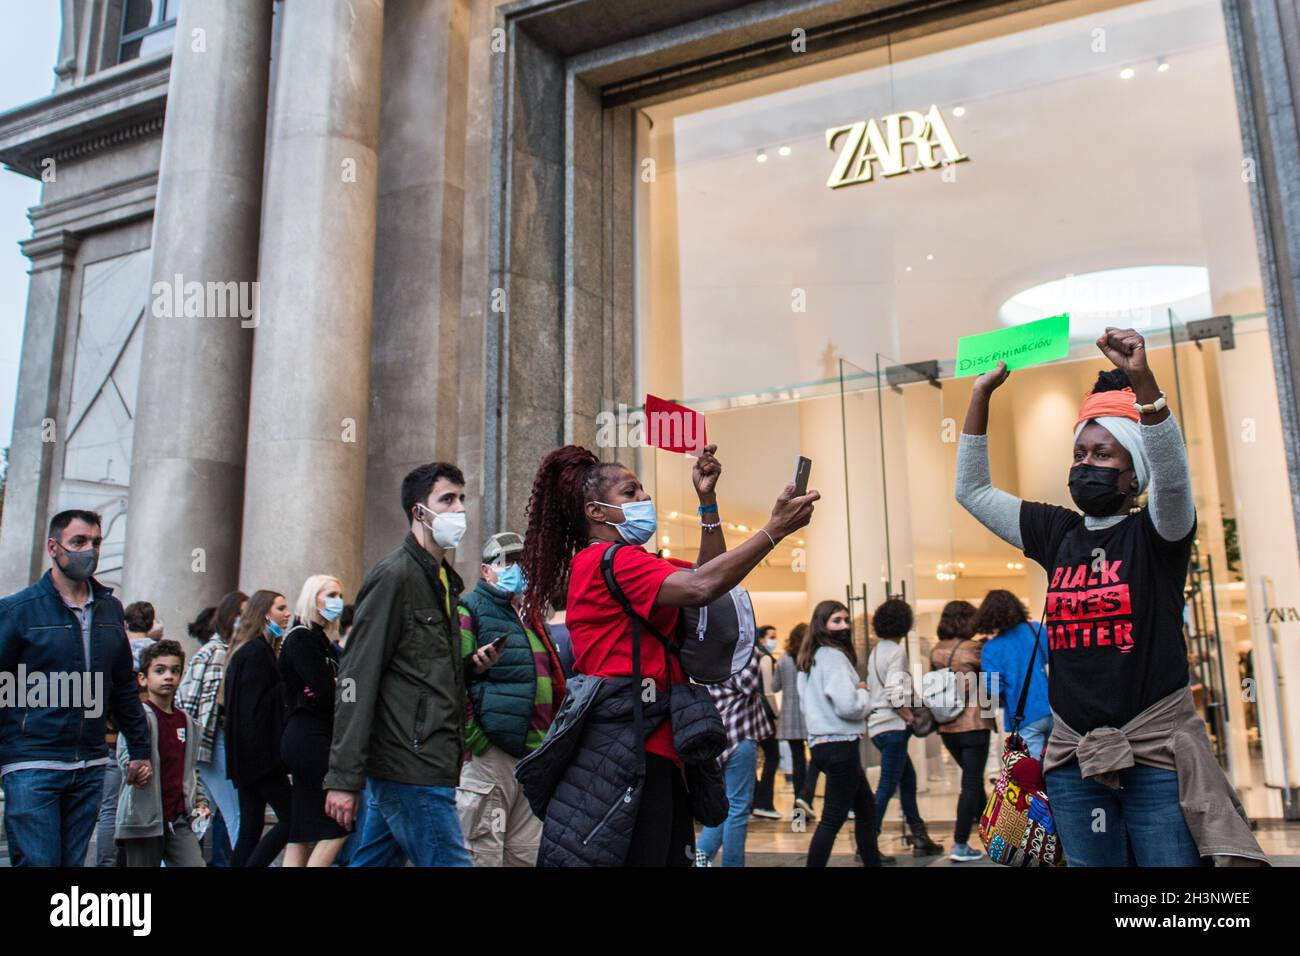 Protesters shouting slogans as one makes a gesture, during the  demonstration.A group of Brazilian activists in Barcelona have held a  demonstration inside and outside the main Spanish clothing store, Zara,  escalated by